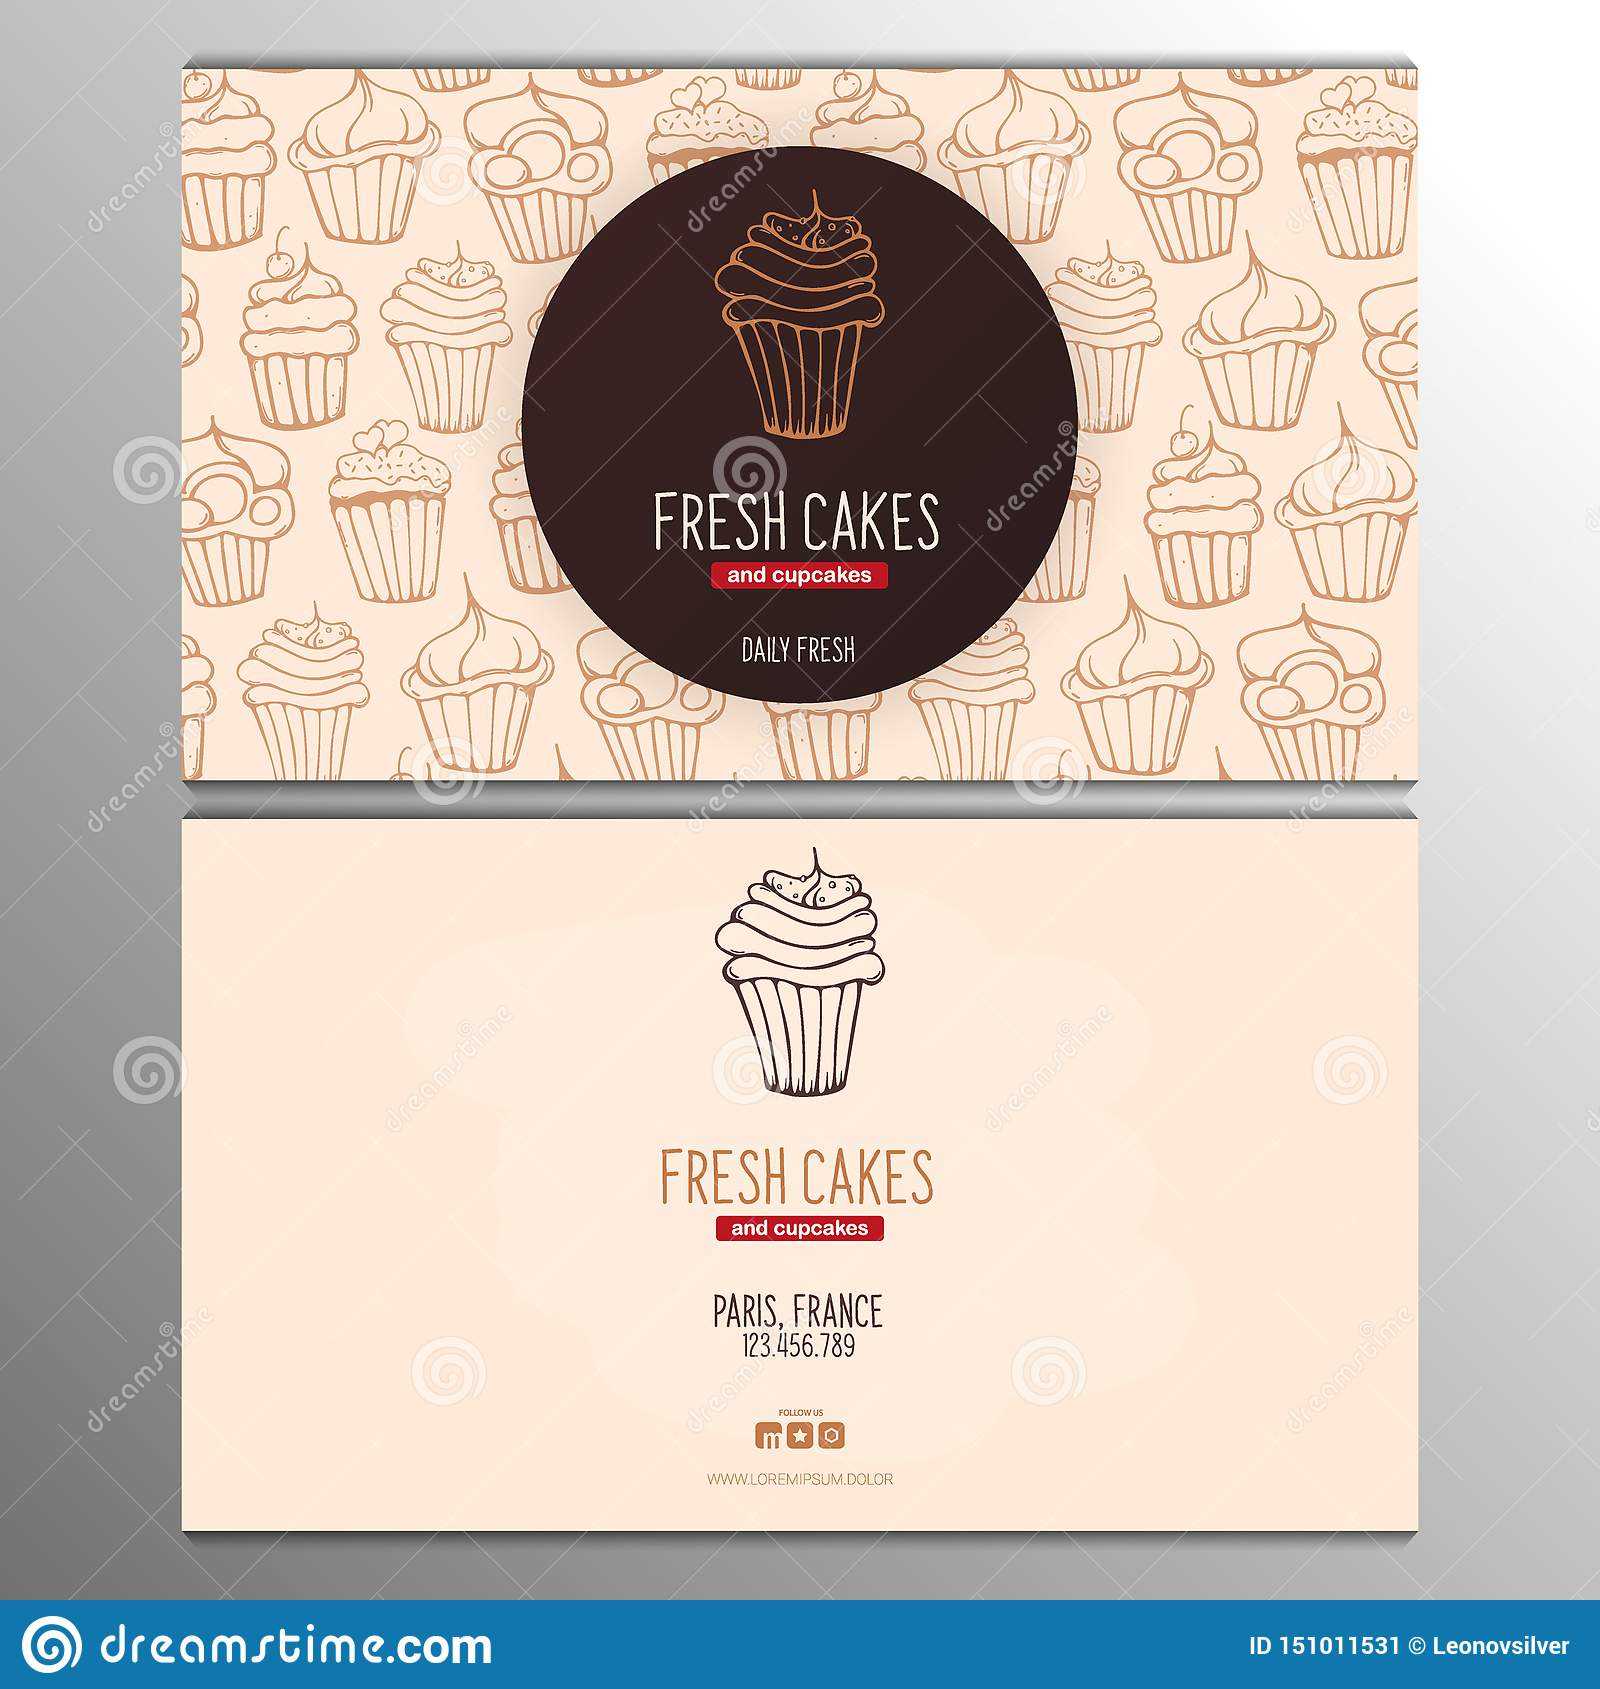 Cupcake Or Cake Business Card Template For Bakery Or Pastry Regarding Cake Business Cards Templates Free